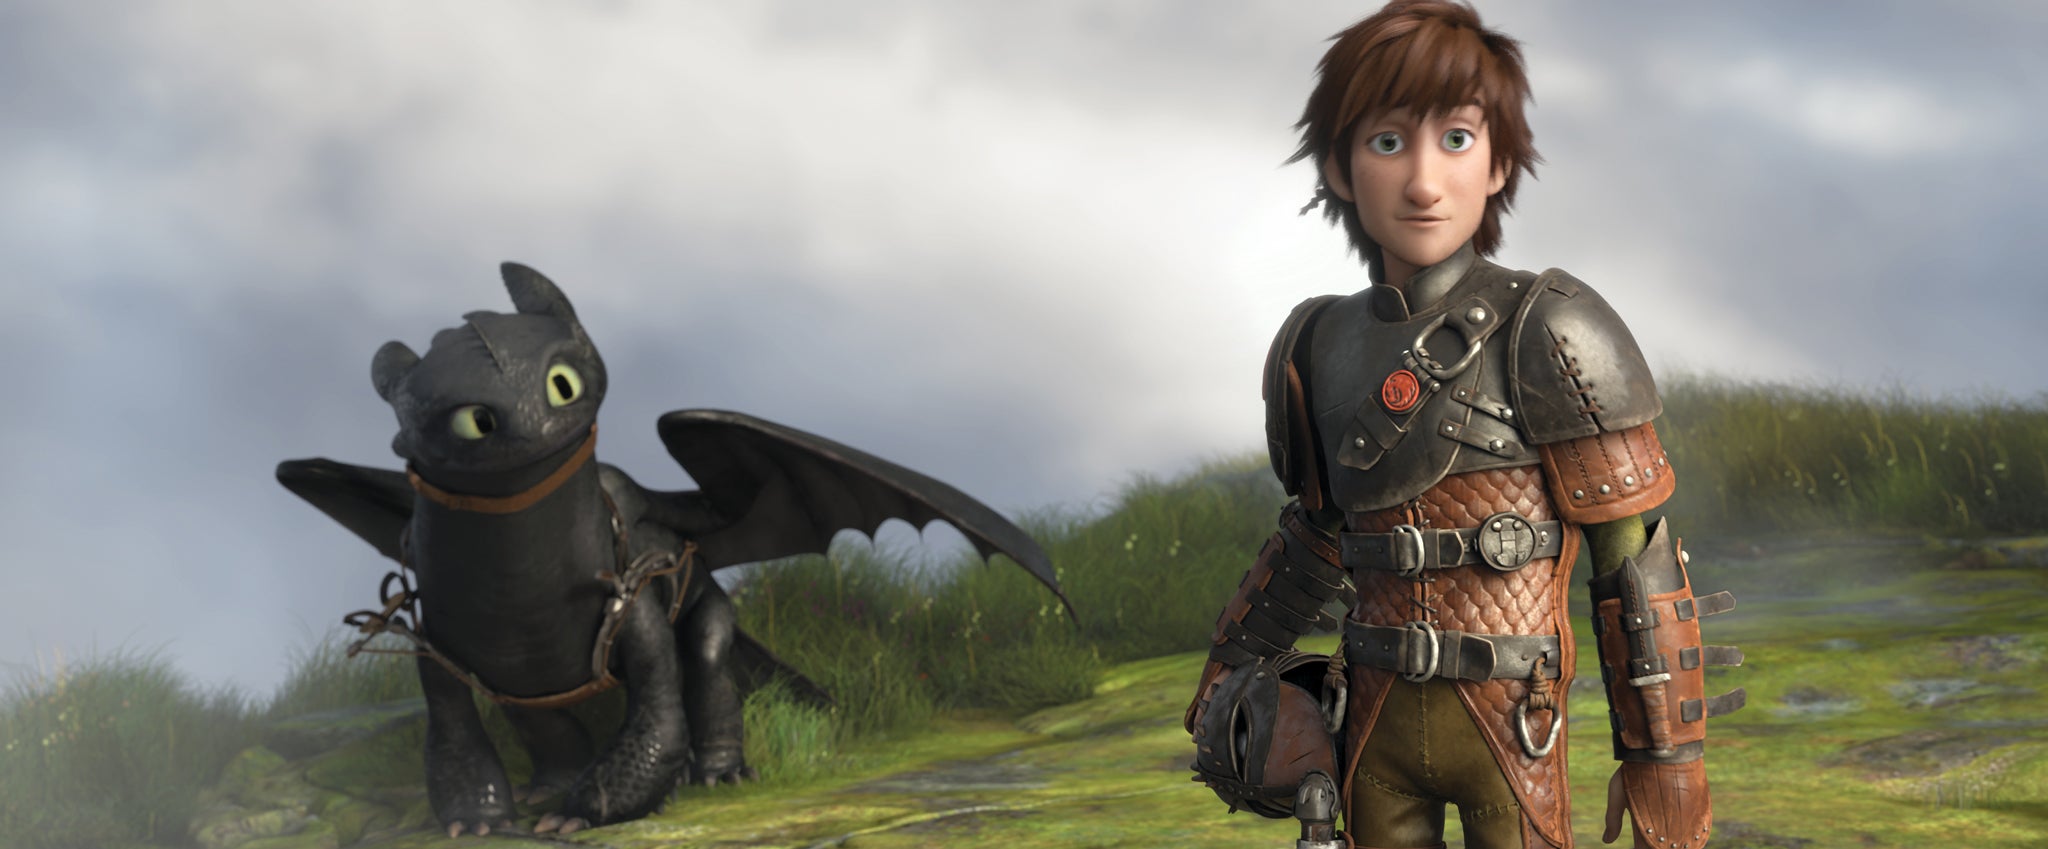 A scene from How To Train Your Dragon 2